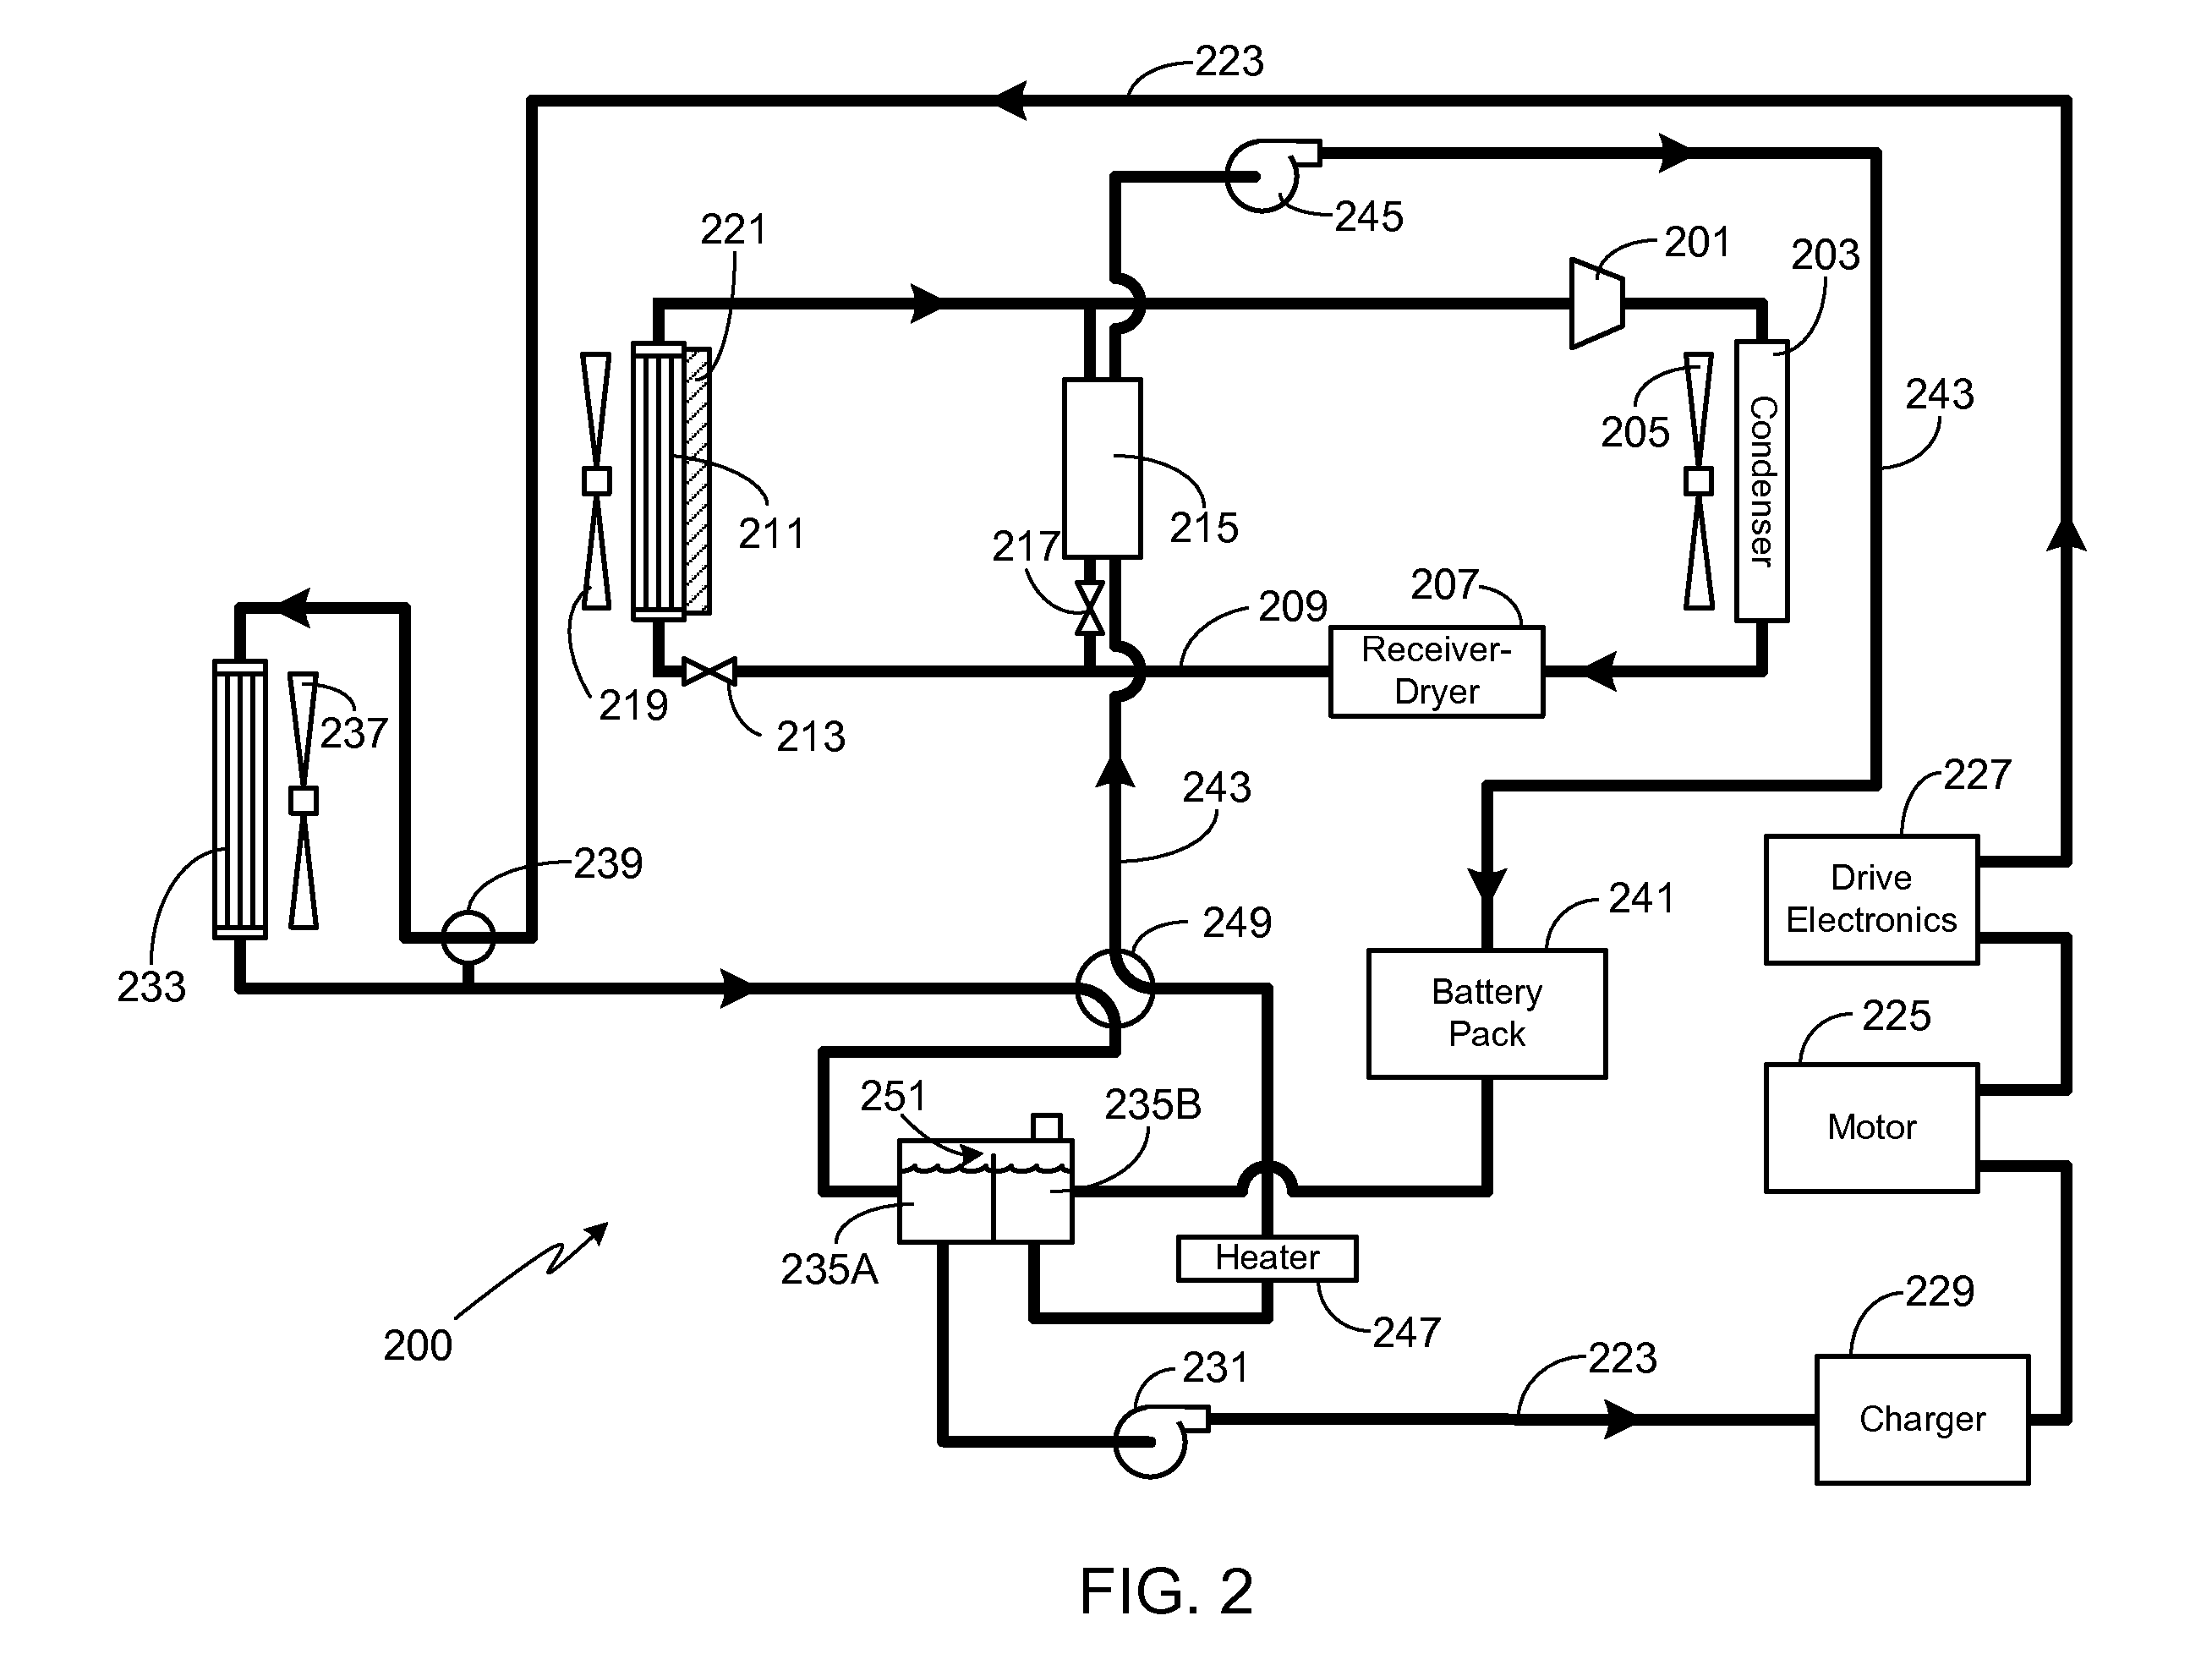 Thermal Management System with Dual Mode Coolant Loops